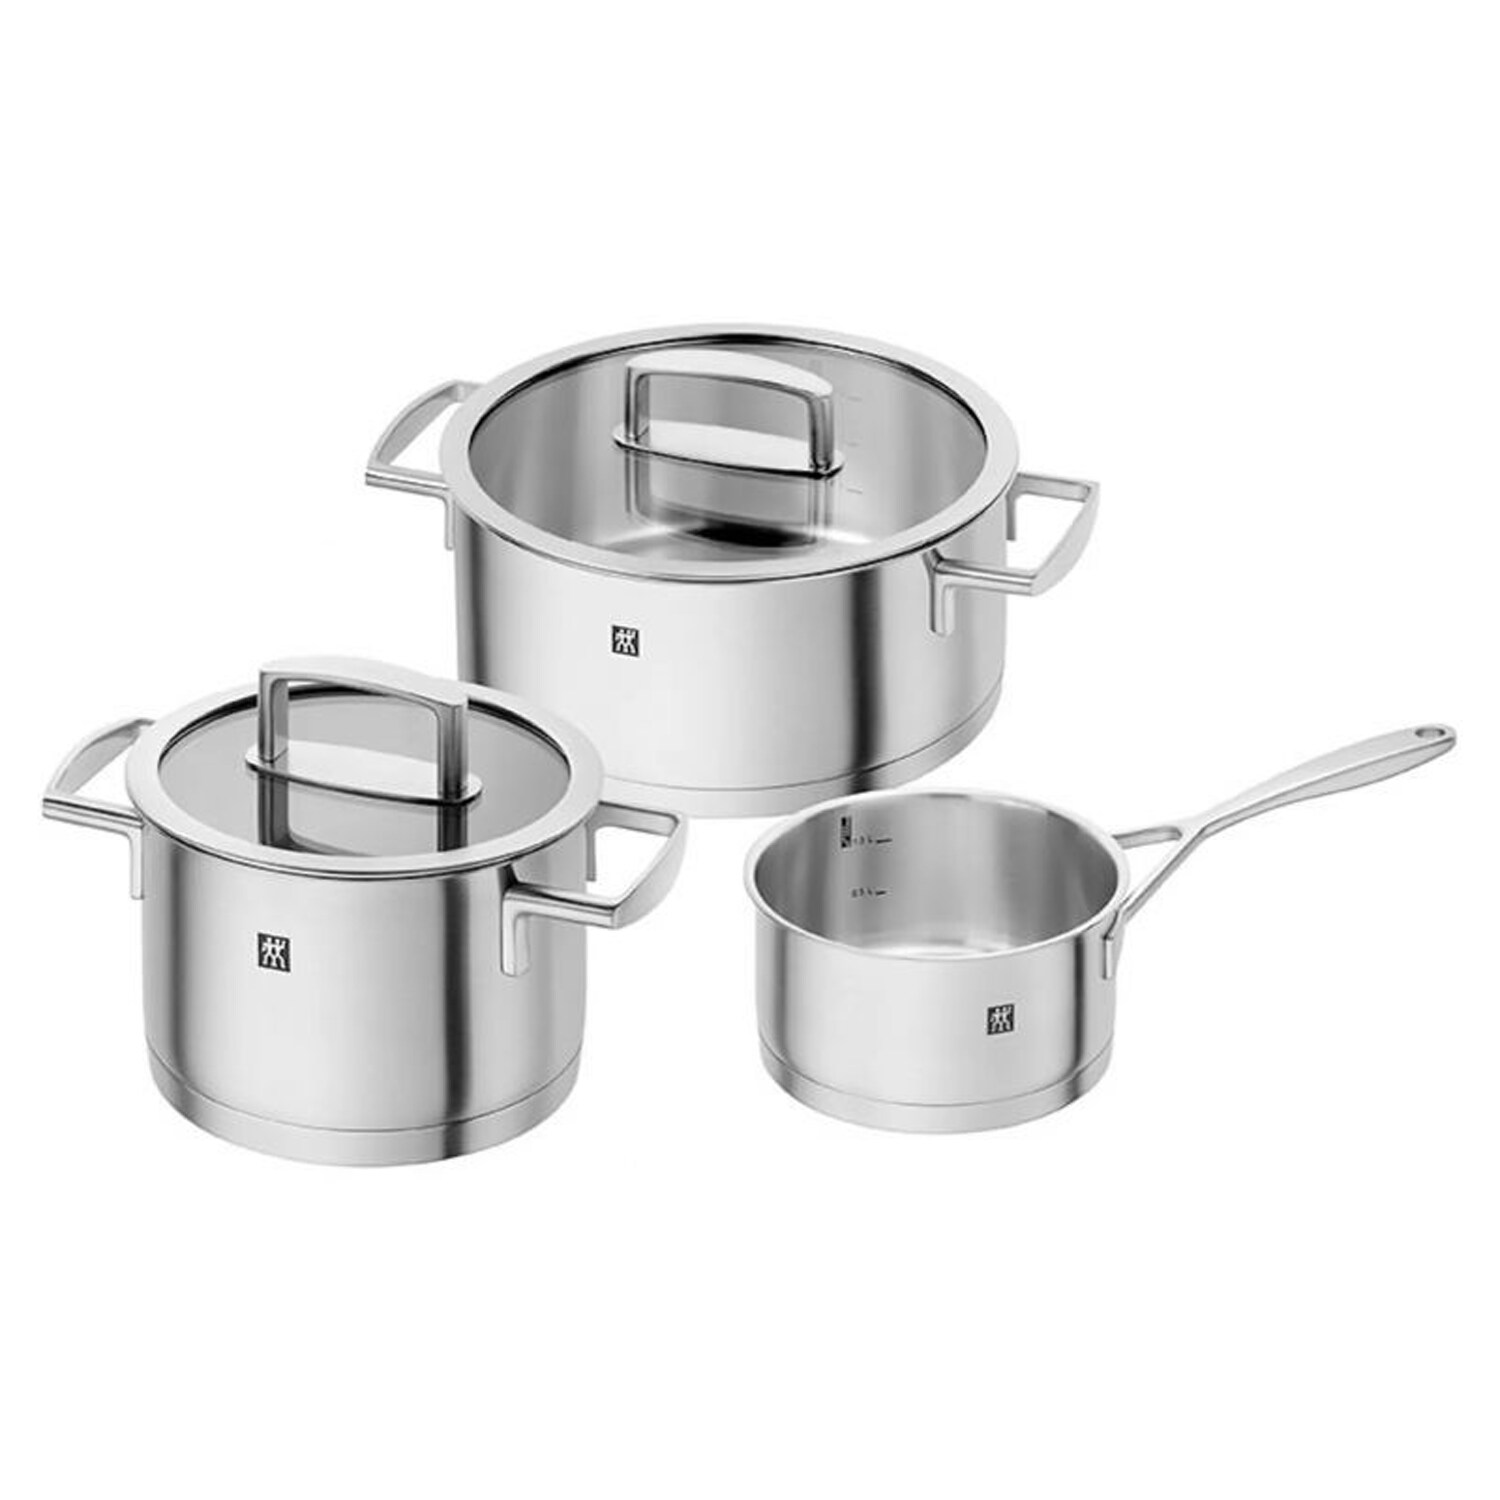 Tefal Ingenio Preference Stainless Steel 13 pieces Cookware Set, Silver,  L9409042